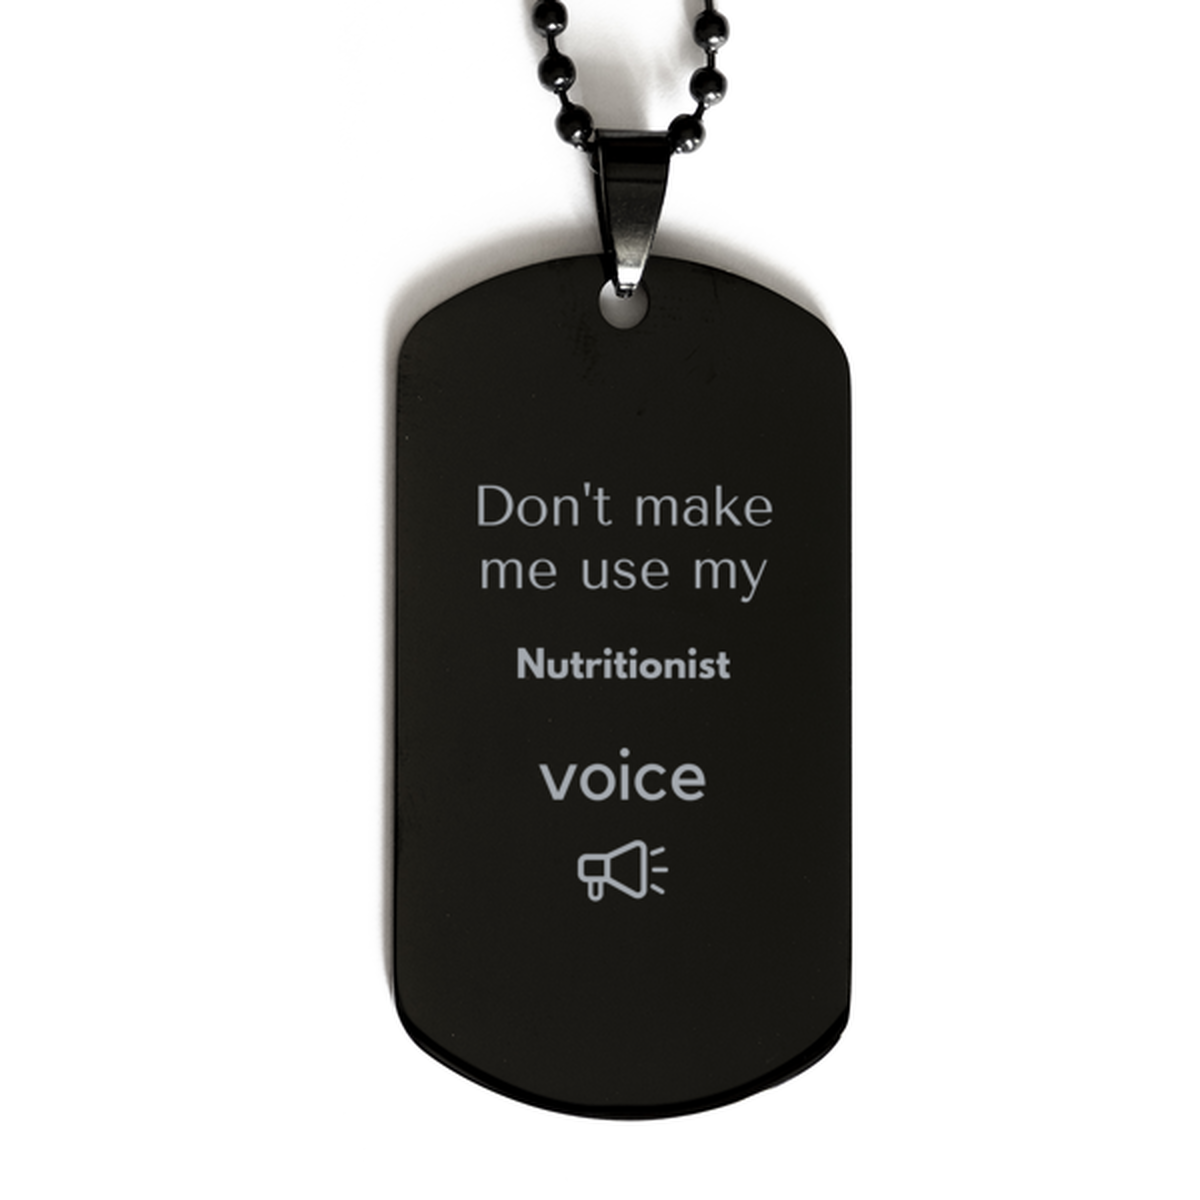 Don't make me use my Nutritionist voice, Sarcasm Nutritionist Gifts, Christmas Nutritionist Black Dog Tag Birthday Unique Gifts For Nutritionist Coworkers, Men, Women, Colleague, Friends